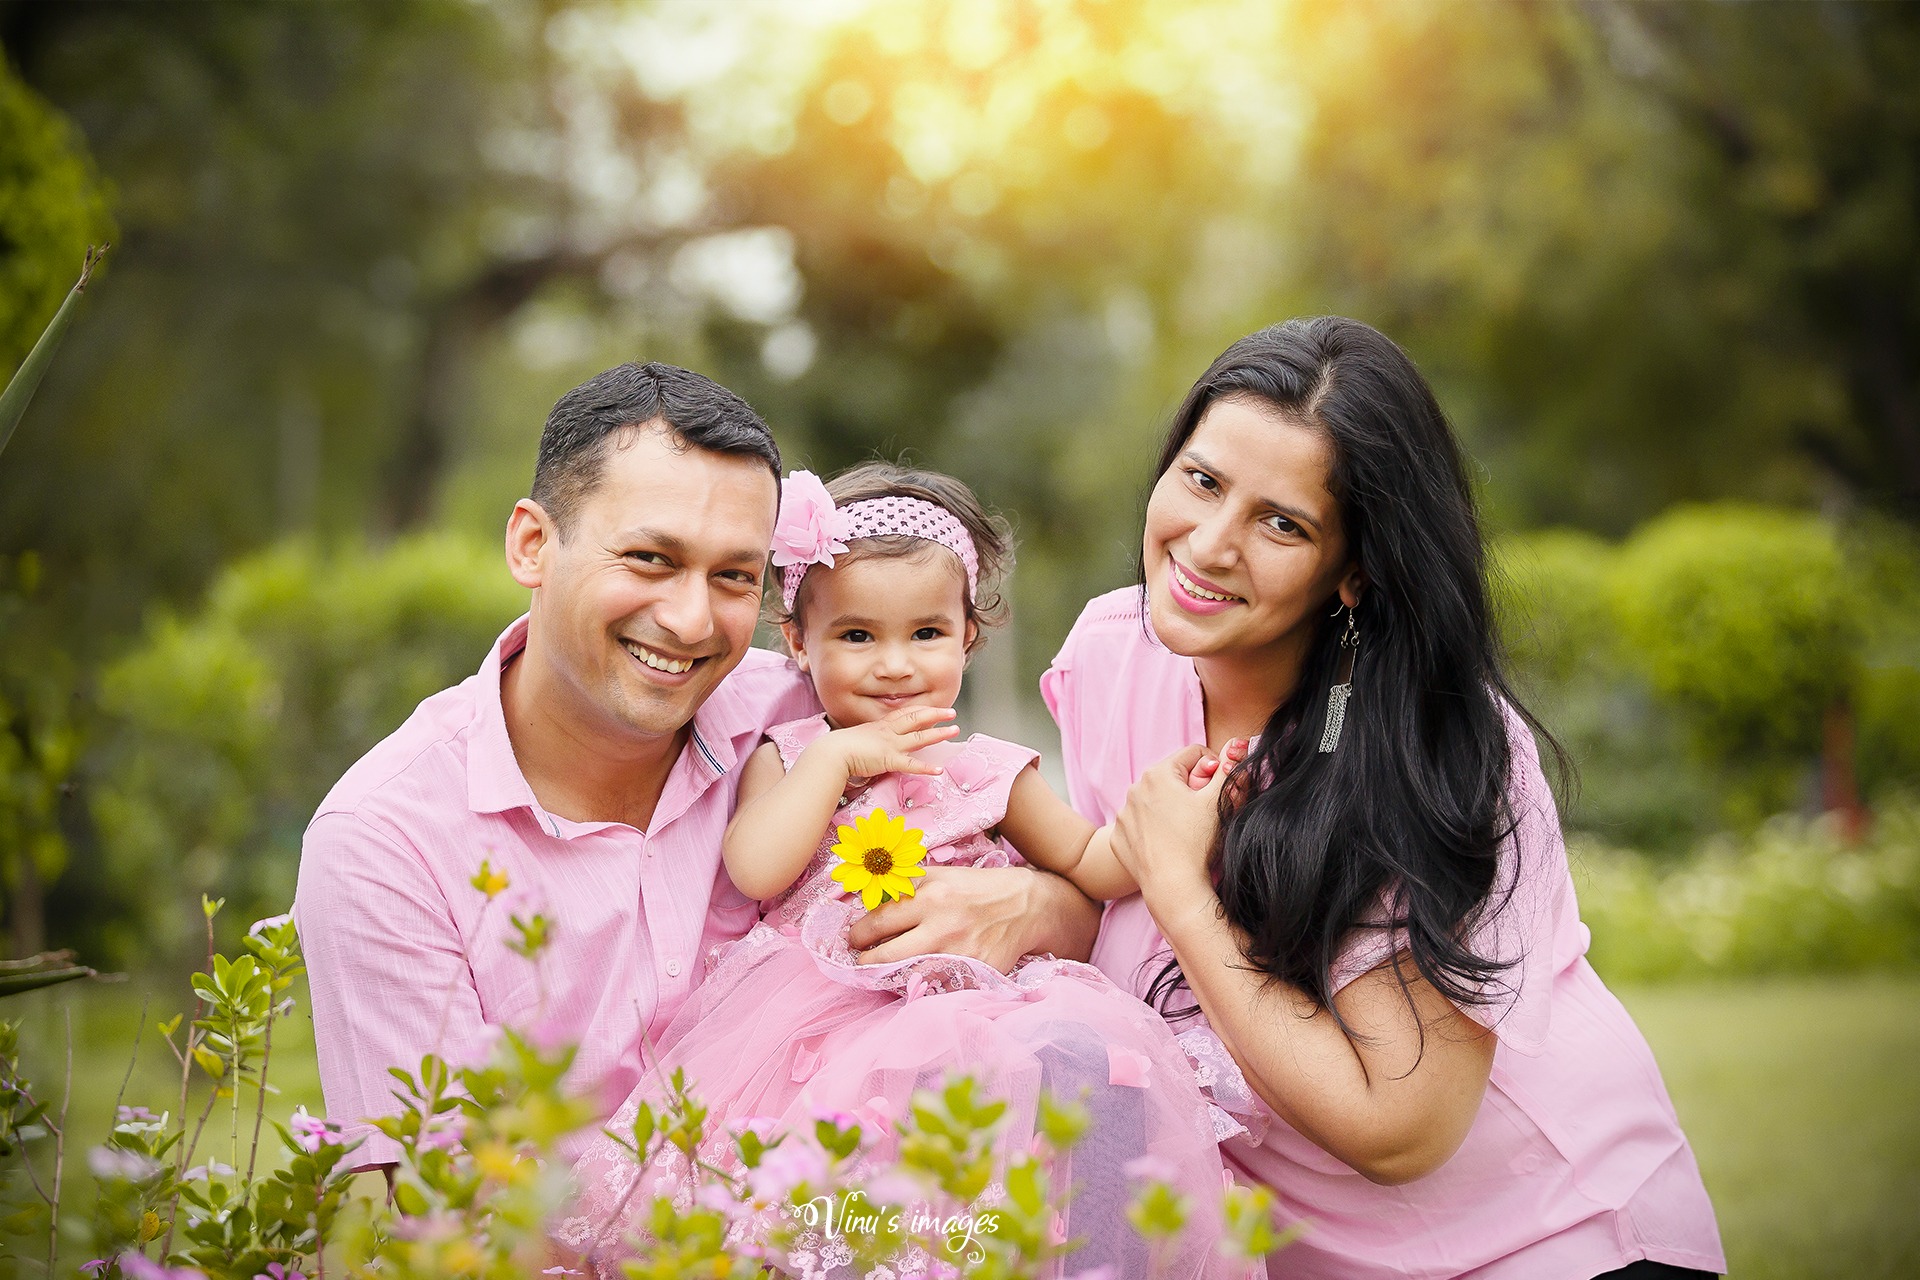 Outdoor ideas for family photography in Delhi, by Vinus Images